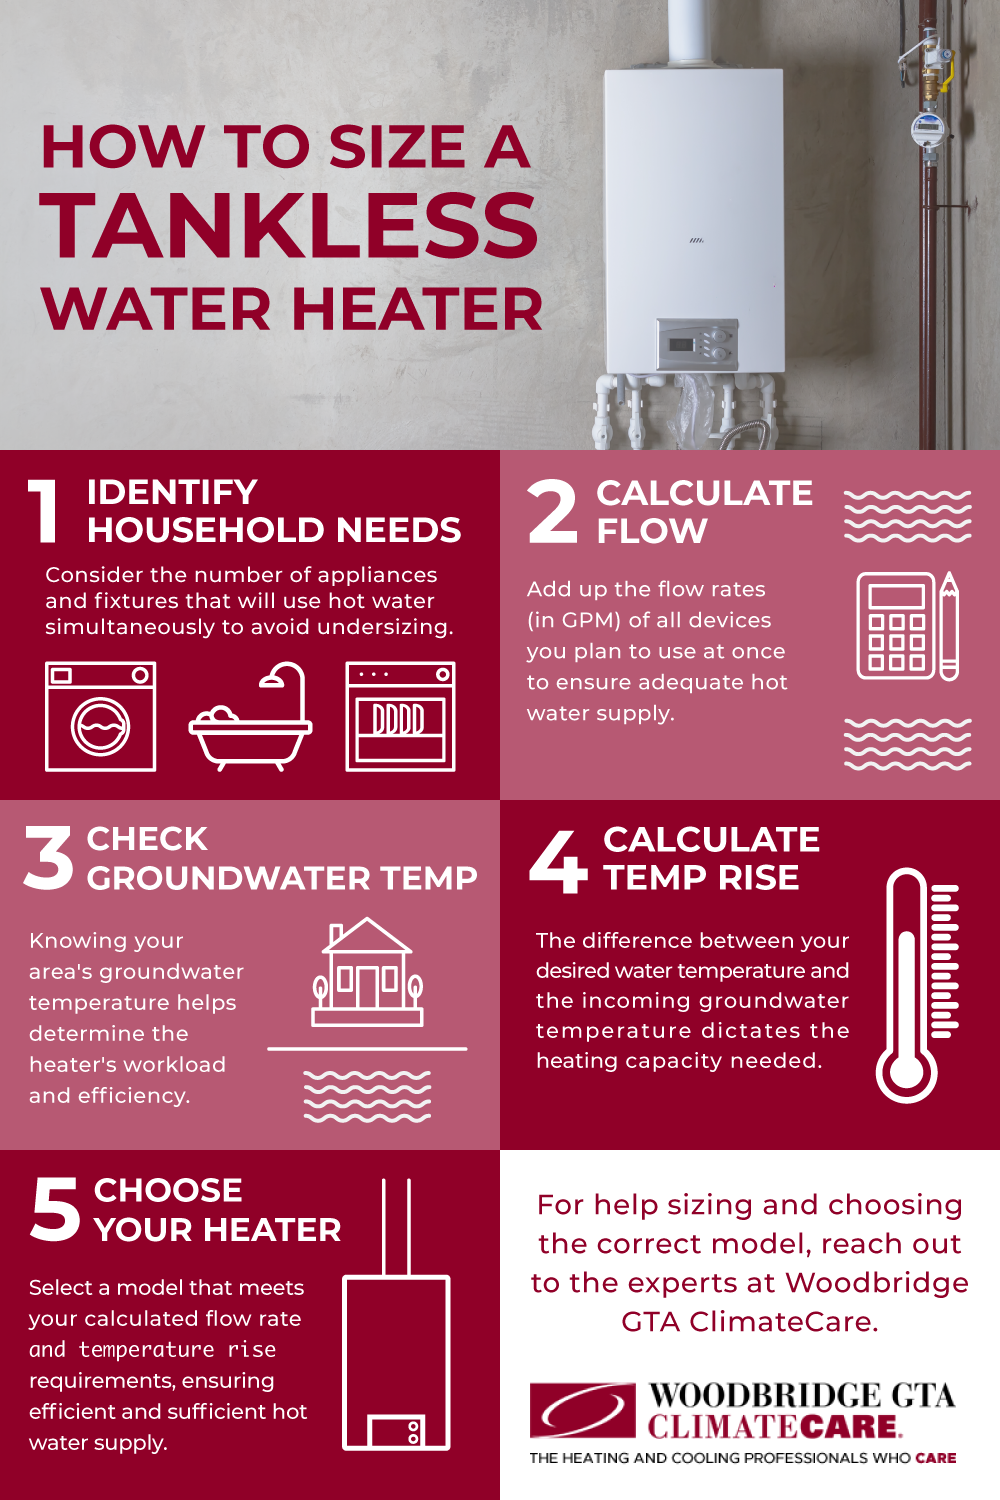 How to Size Your Tankless Water Heater: A Quick Guide Infographic